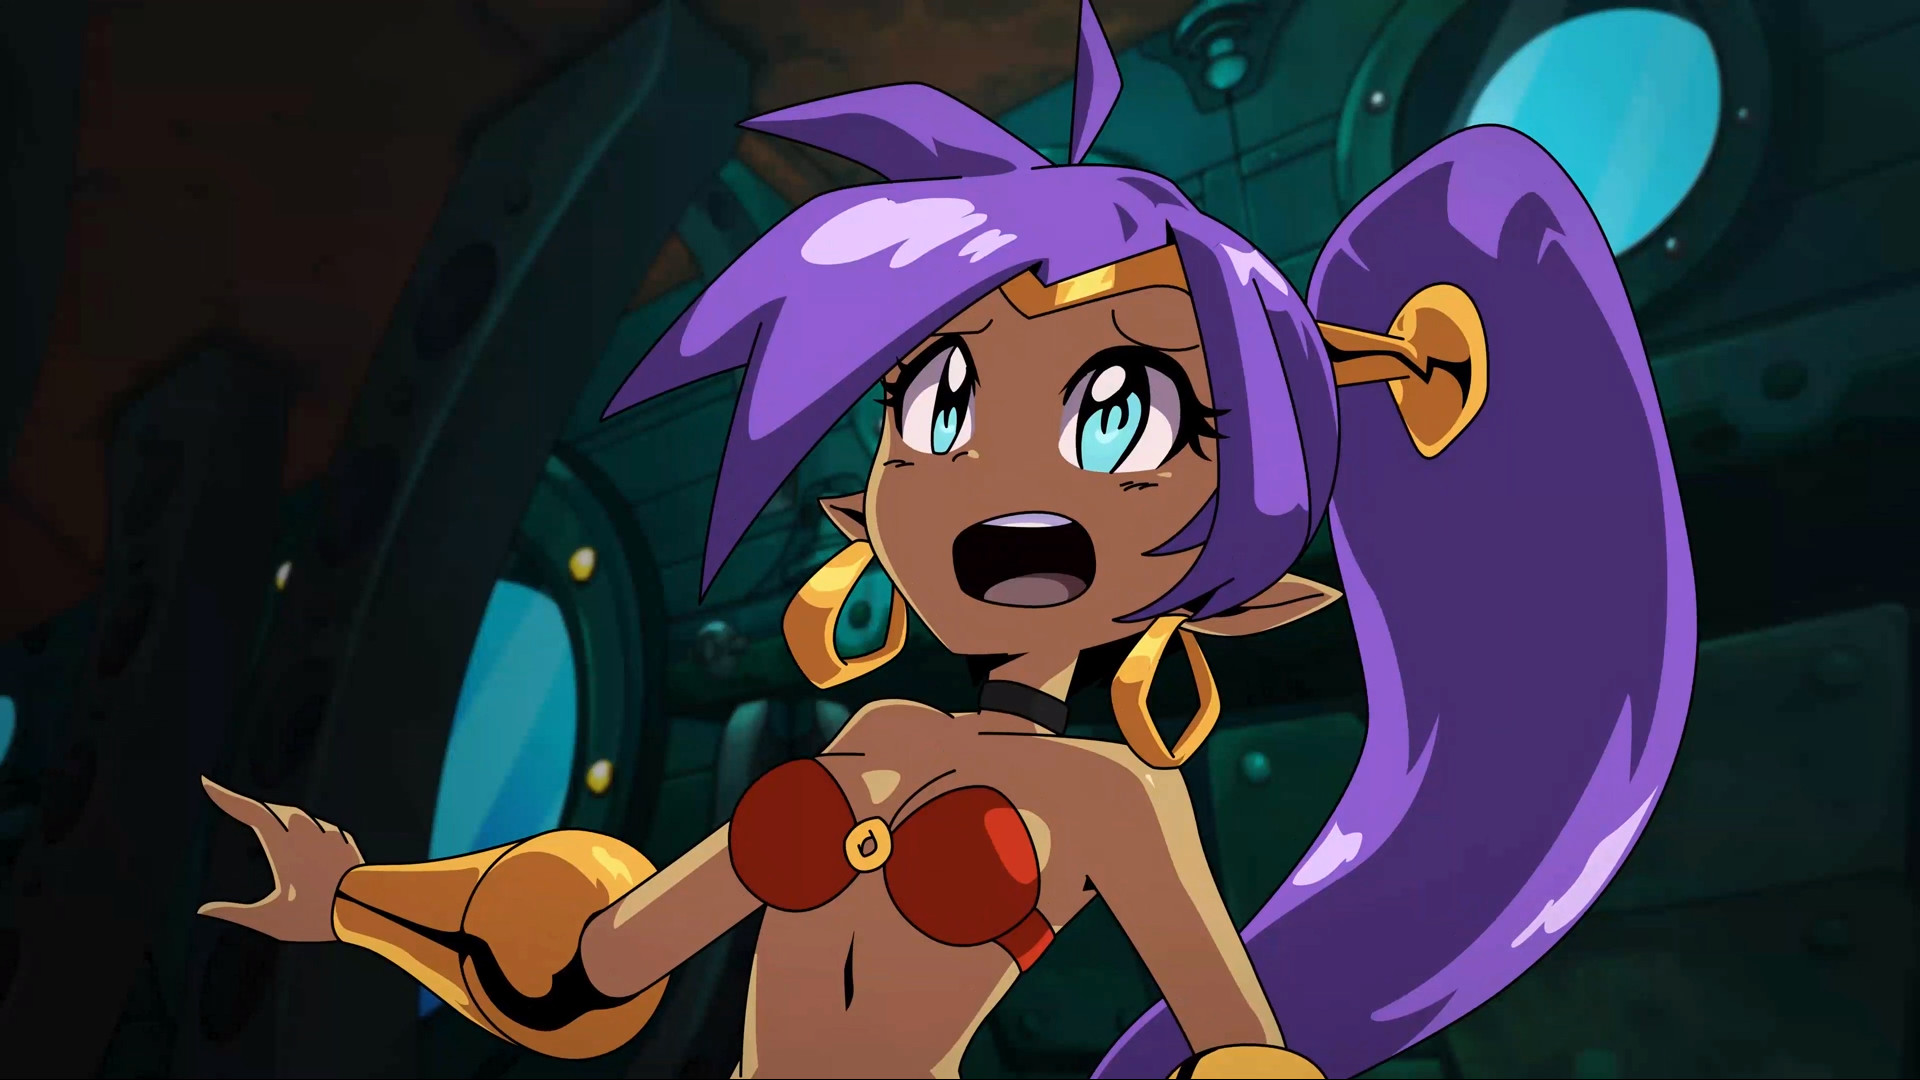 Free Shantae and the Seven Sirens Update Adds New Modes